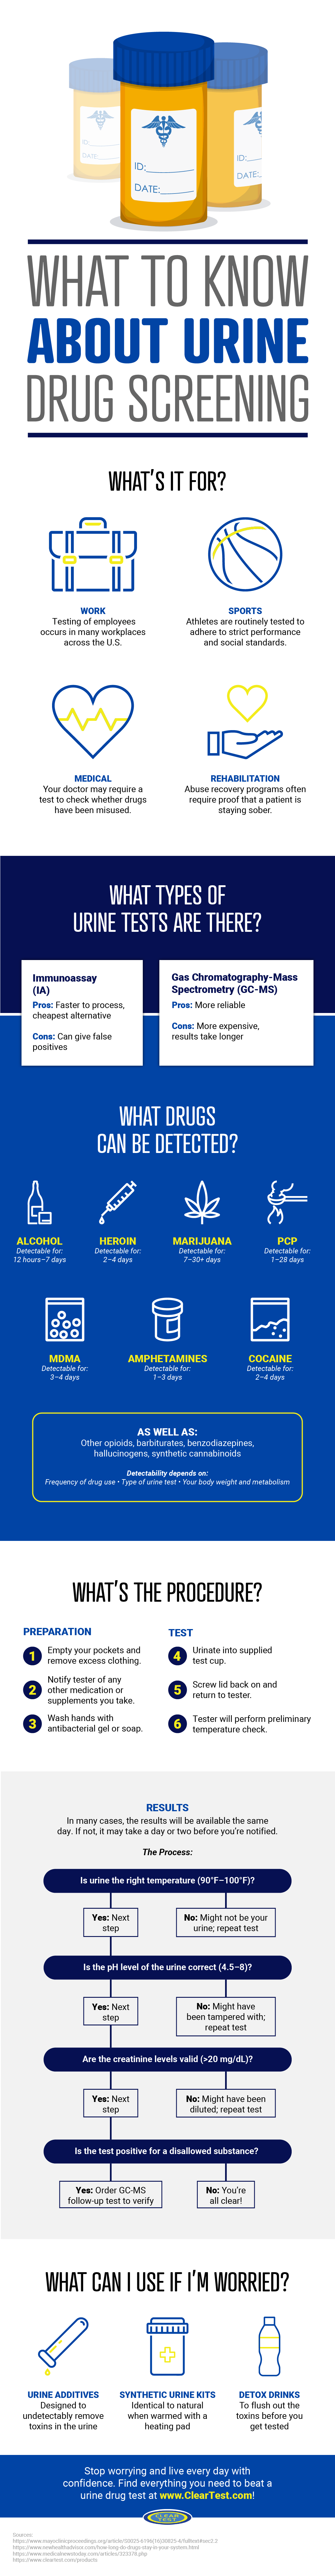 What to Know About Urine Drug Screening Infographic